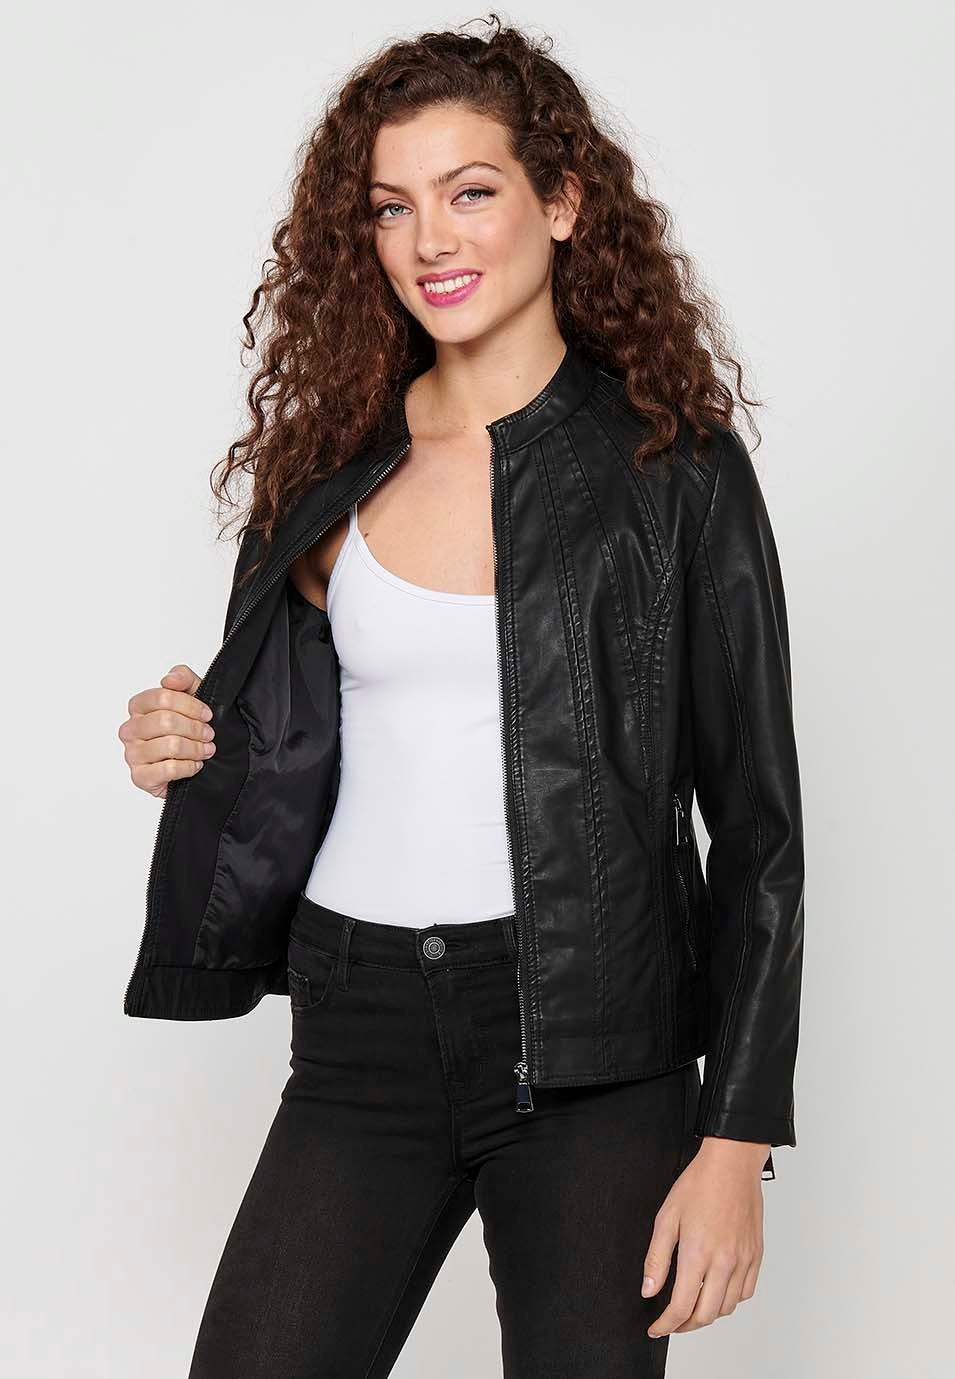 Long Sleeve Jacket with Round High Neck and Front Zipper Closure in Black for Women 7